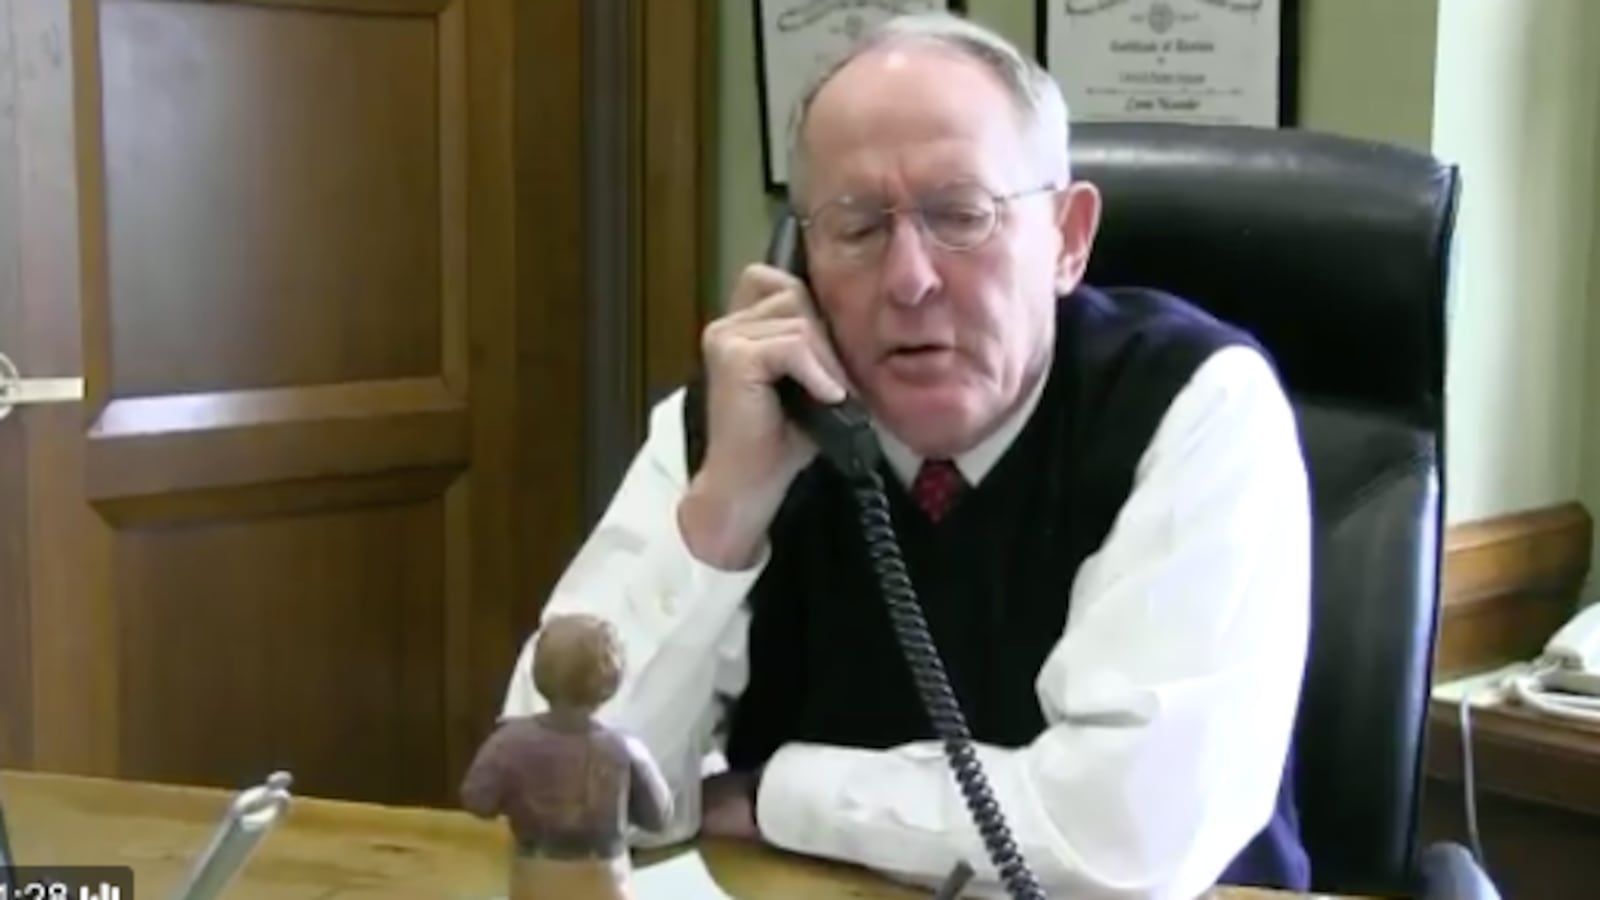 U.S. Sen. Lamar Alexander fielded calls from constituents on Feb. 3, including calls about Betsy Devos's nomination as secretary of education.